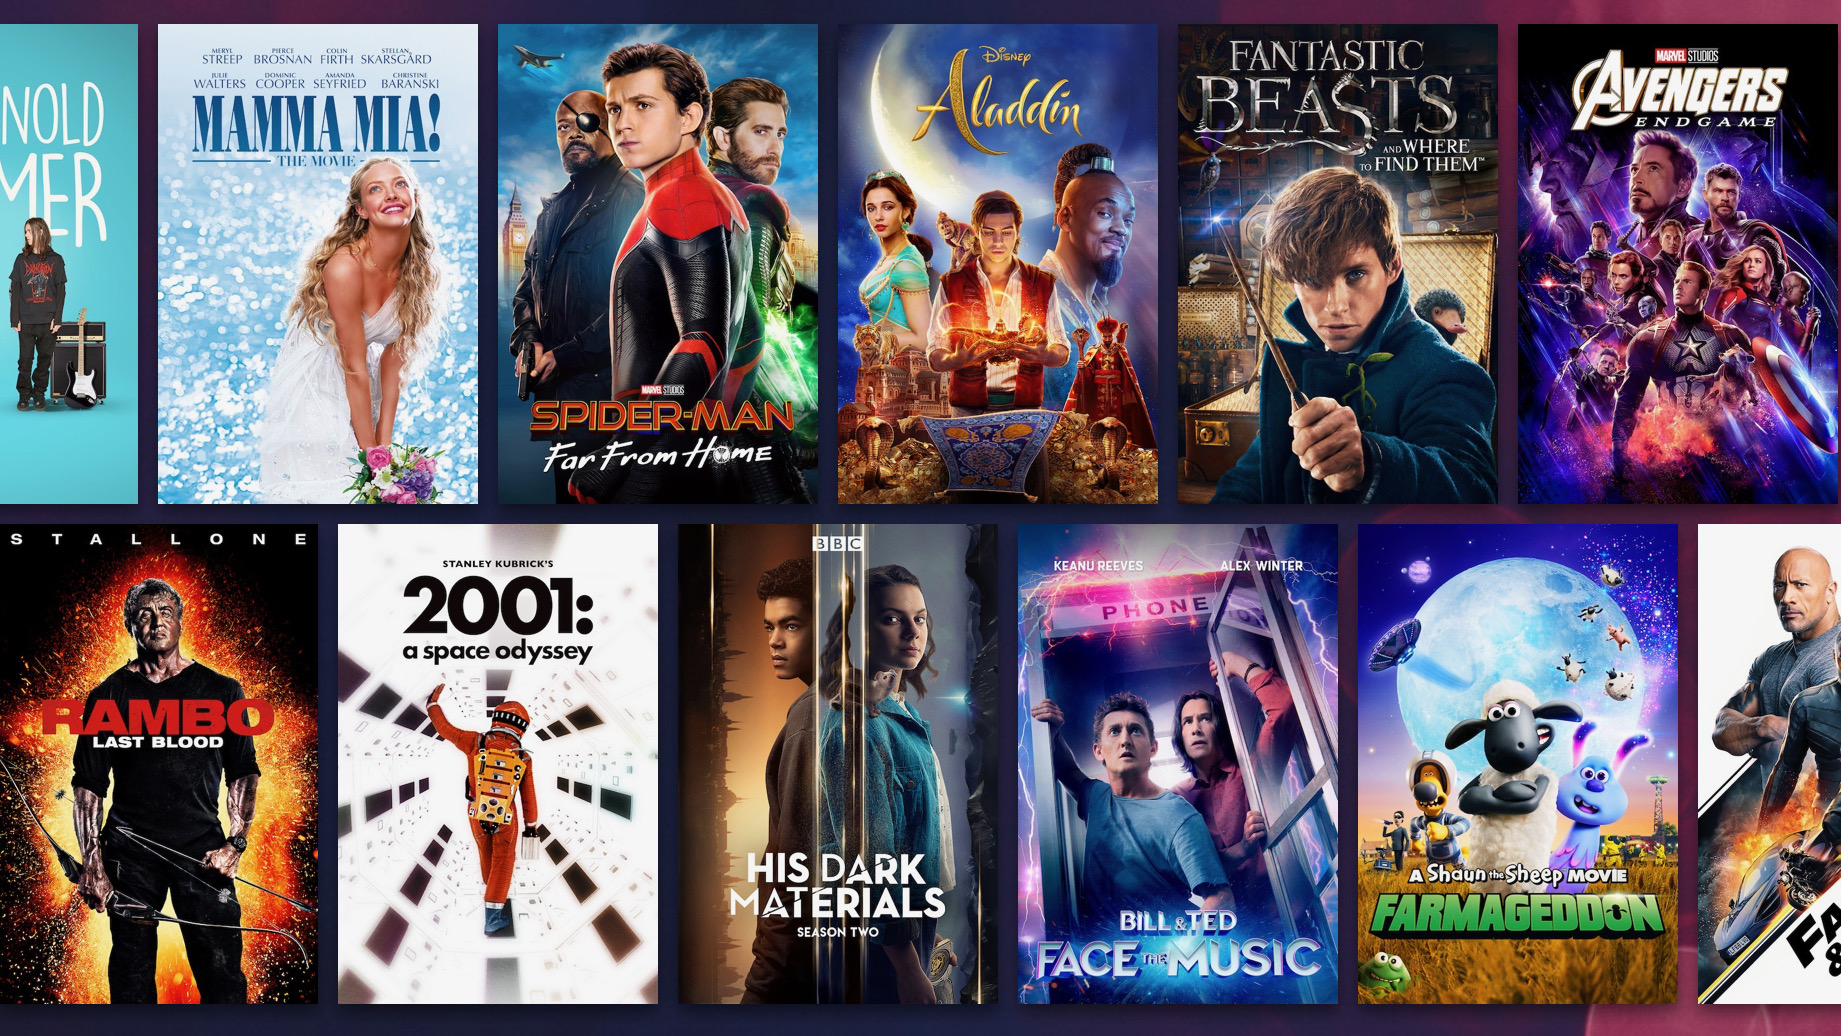 this-week-only,-you-can-buy-a-great-4k-film-from-one-of-these-streaming-services-for-just-2.99